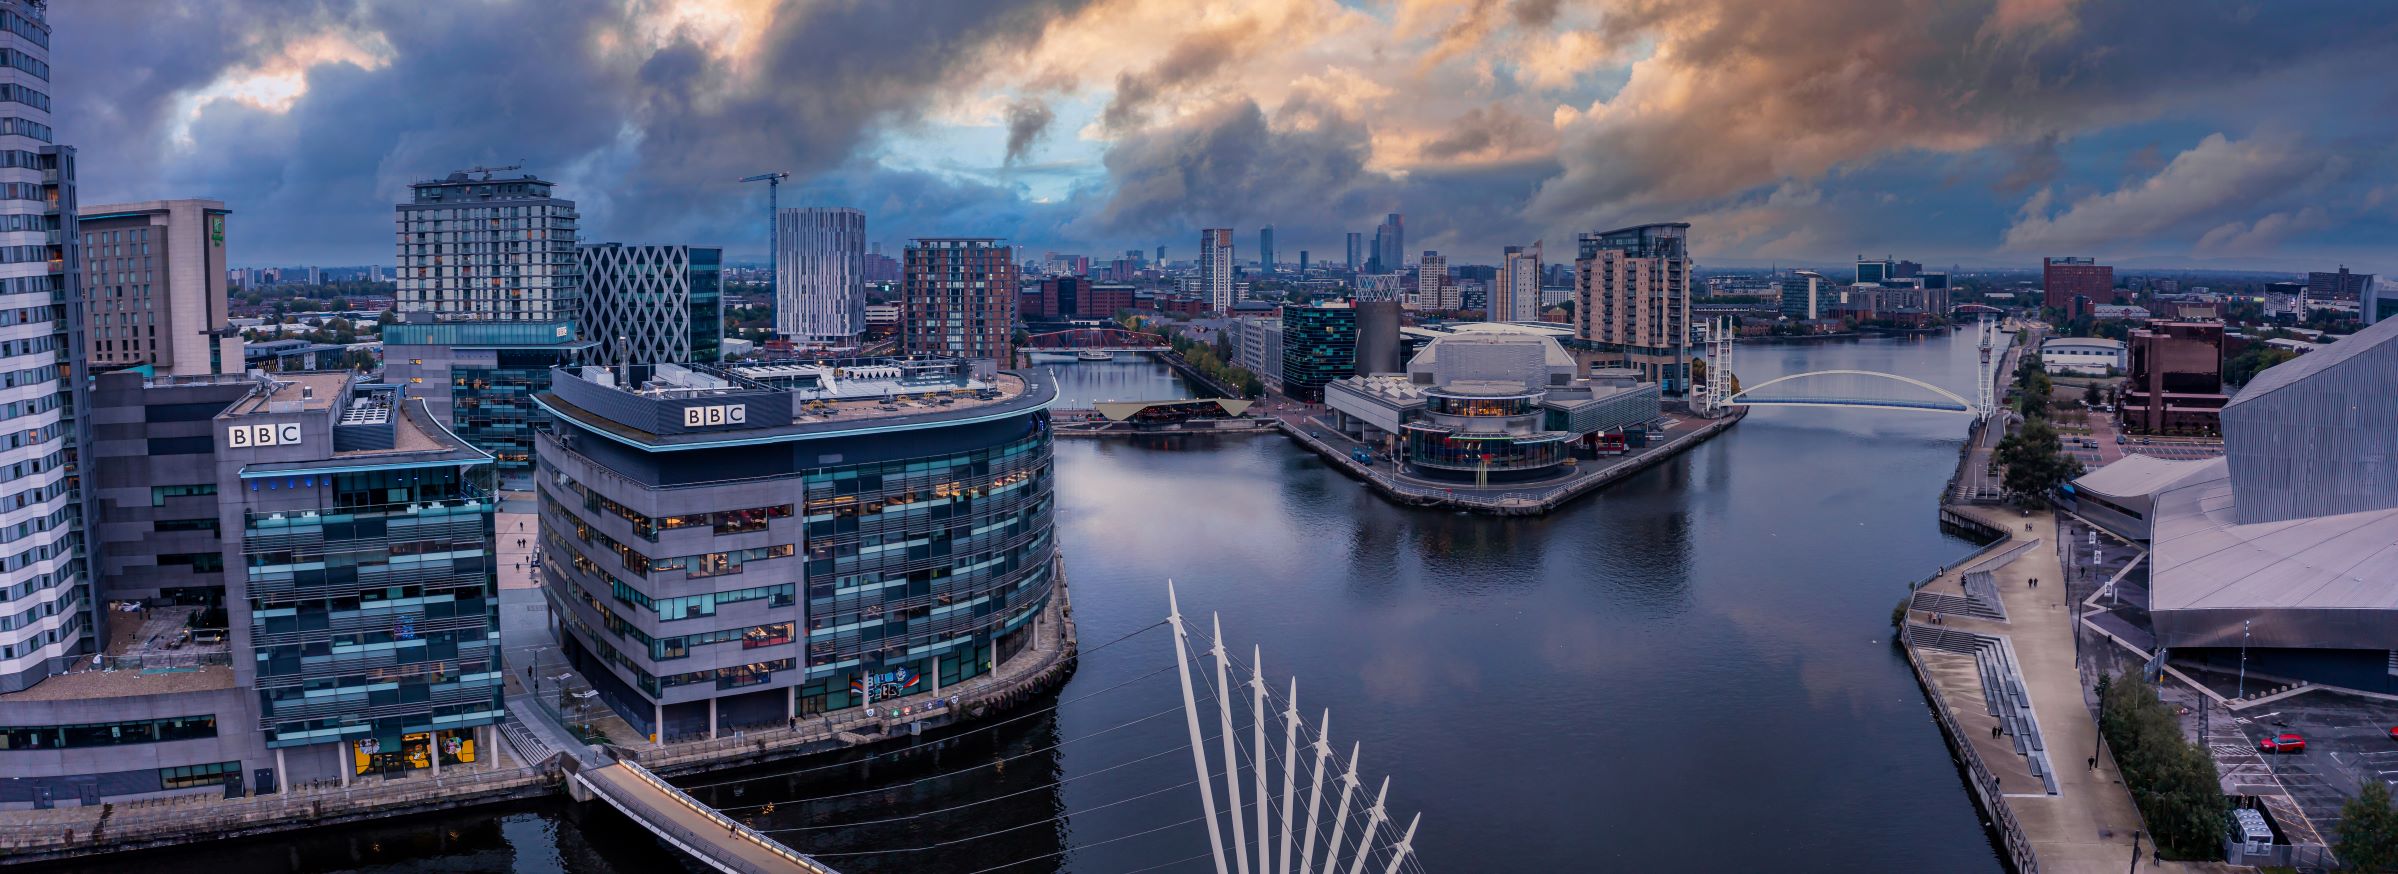 aerial-view-media-city-uk-is-banks-manchester-dusk